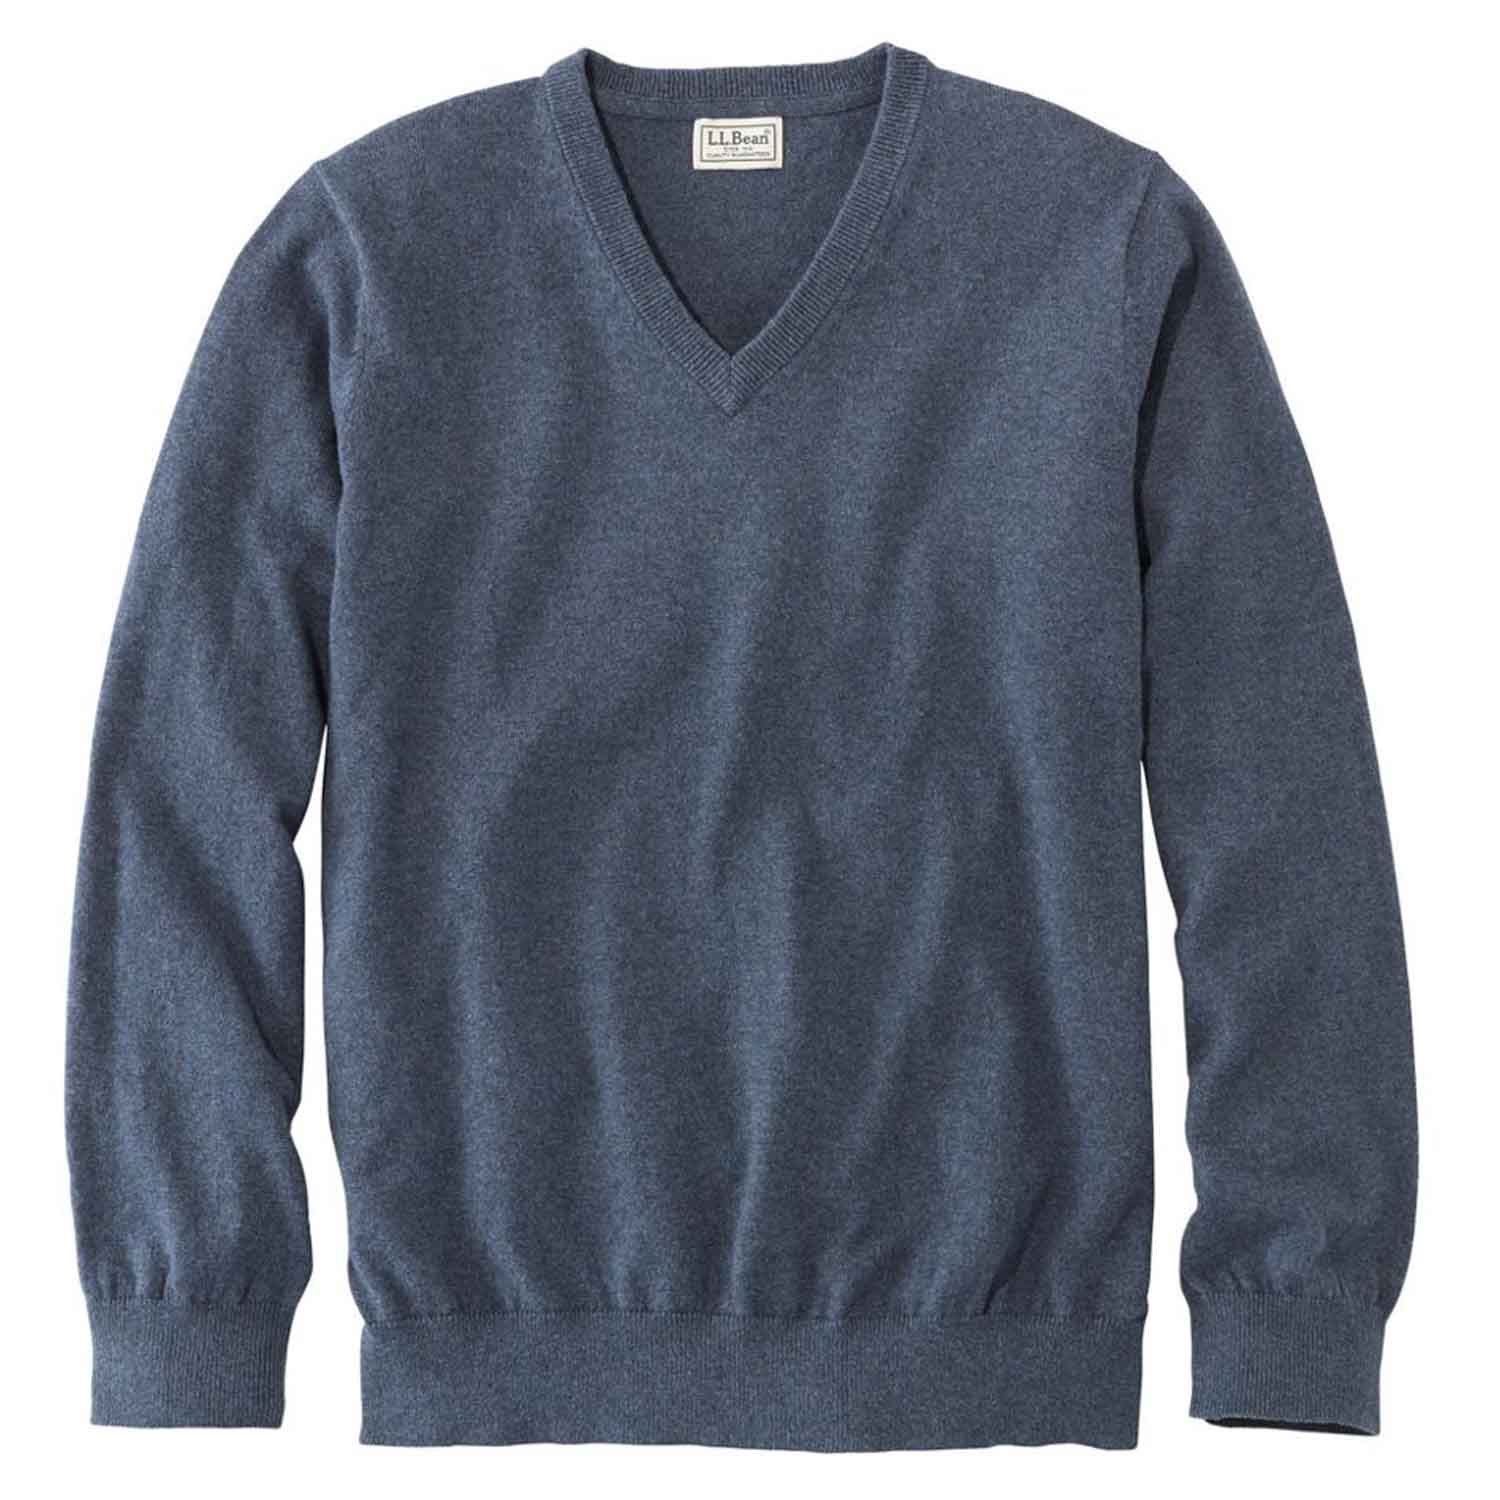 types of sweaters vneck